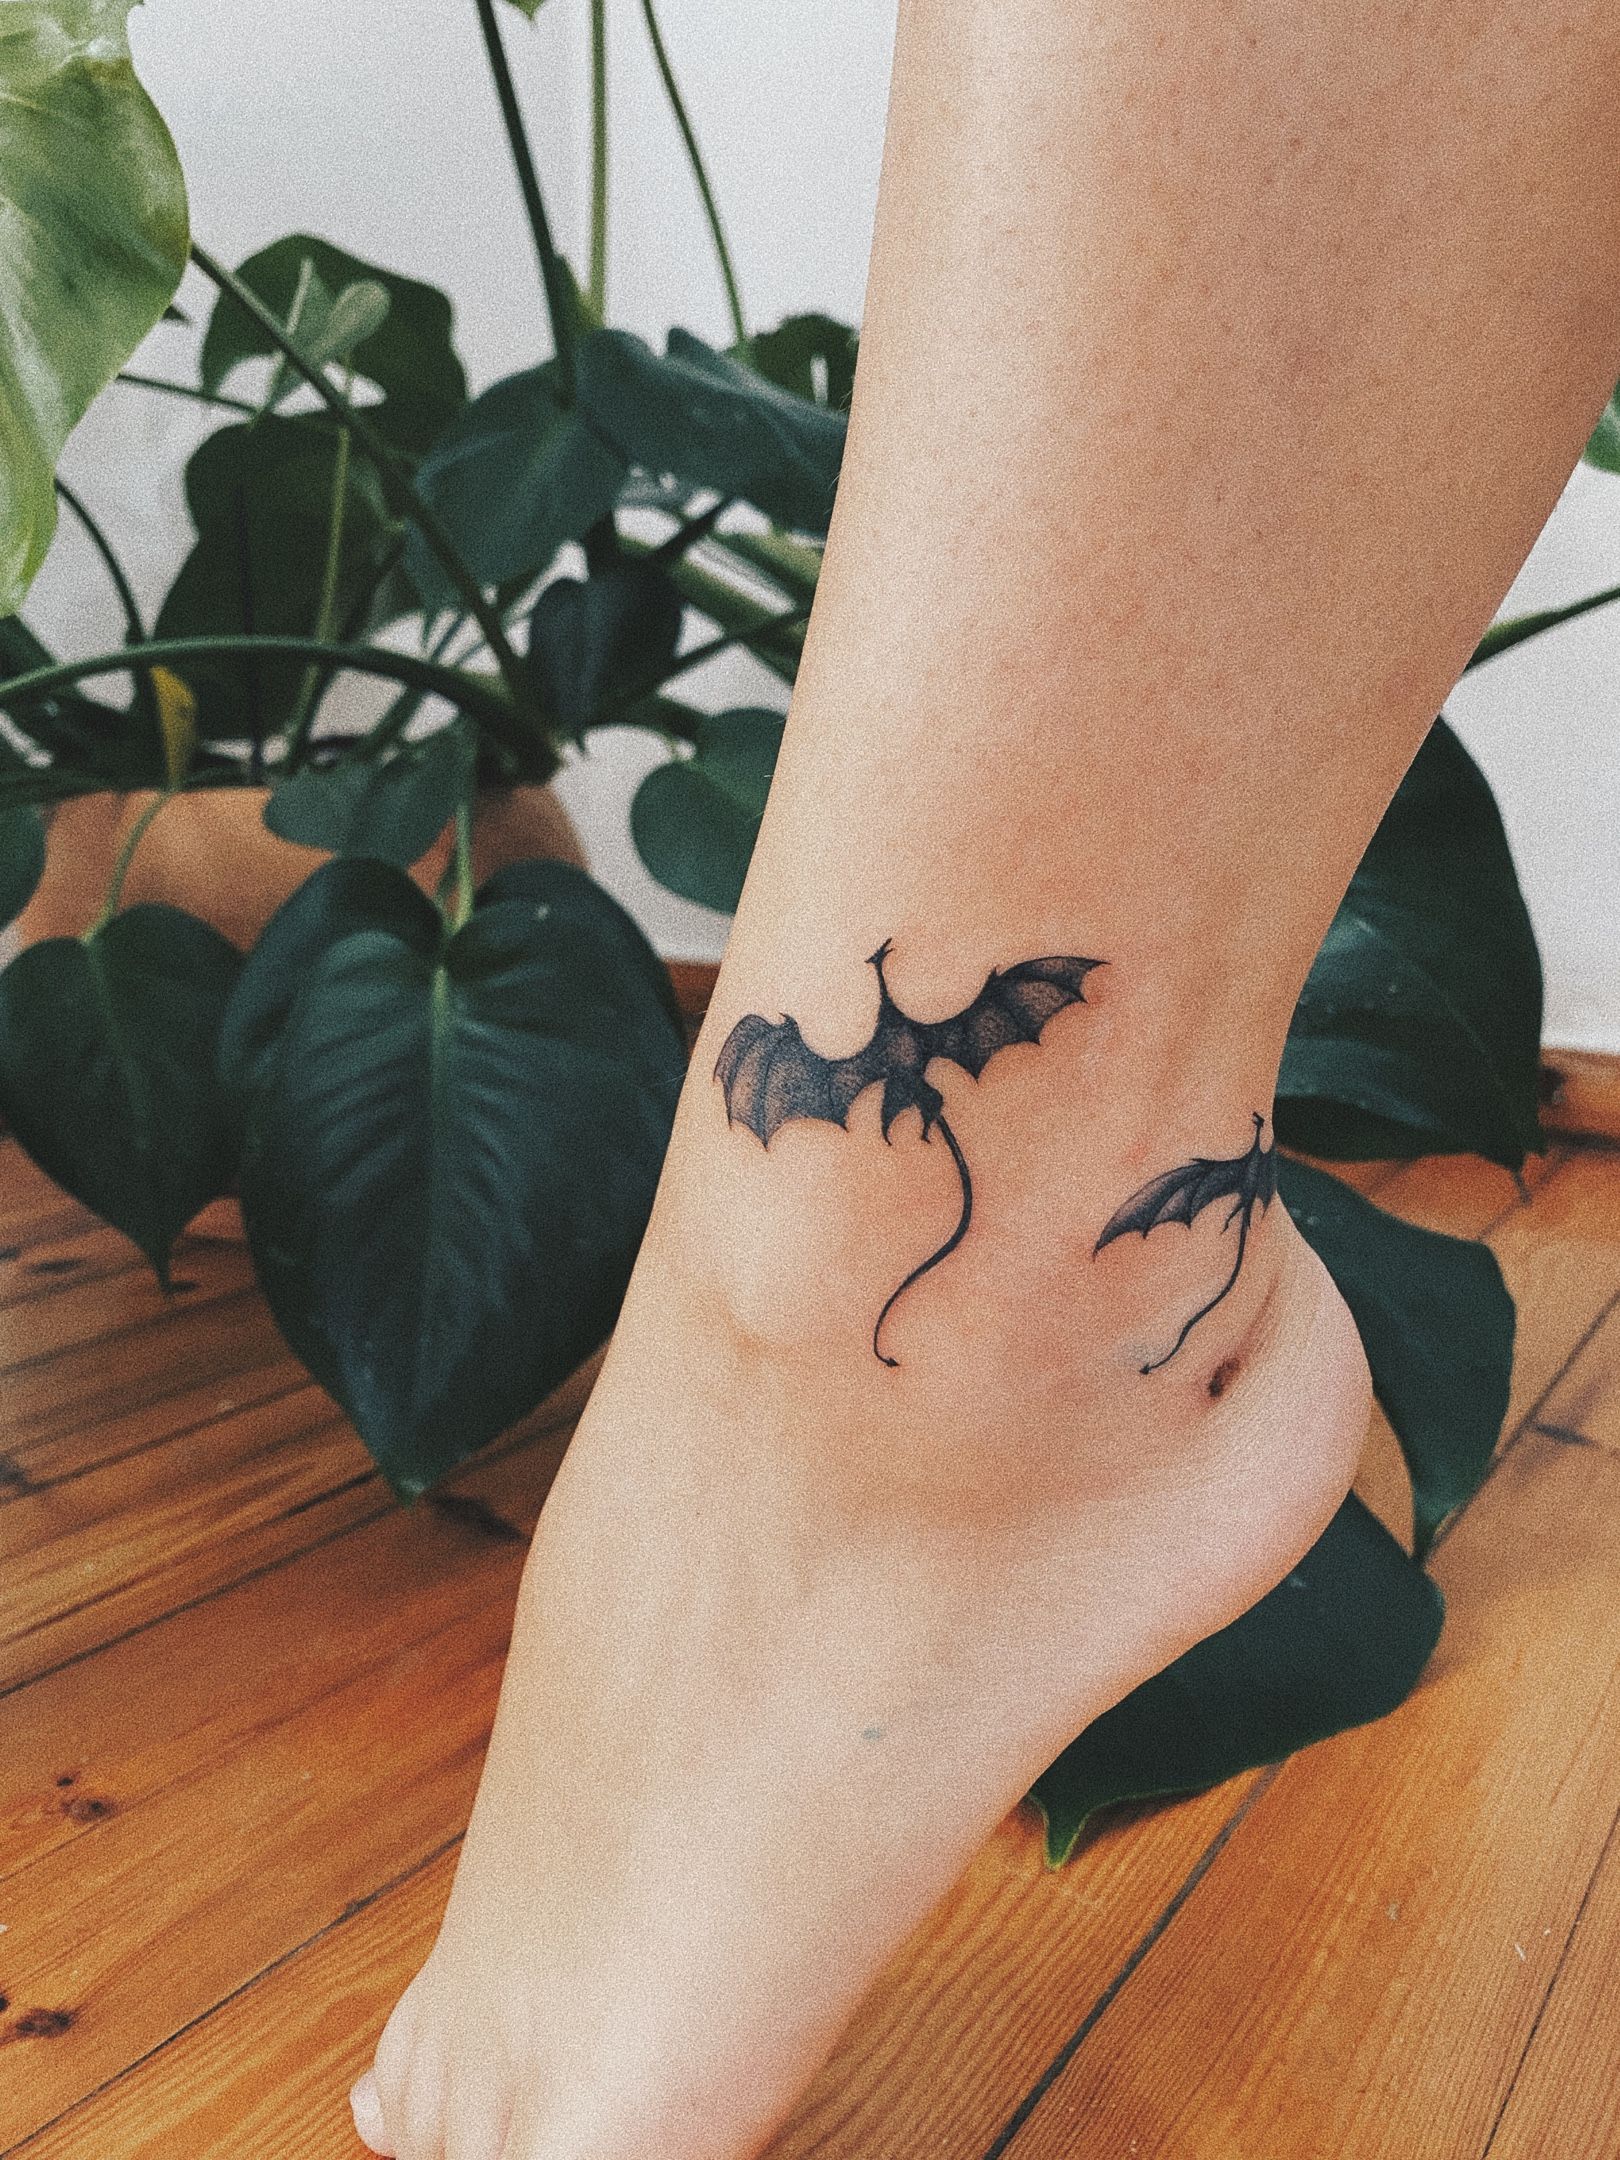 Drogon | Drogon game of thrones, Game of thrones art, Game of thrones tattoo